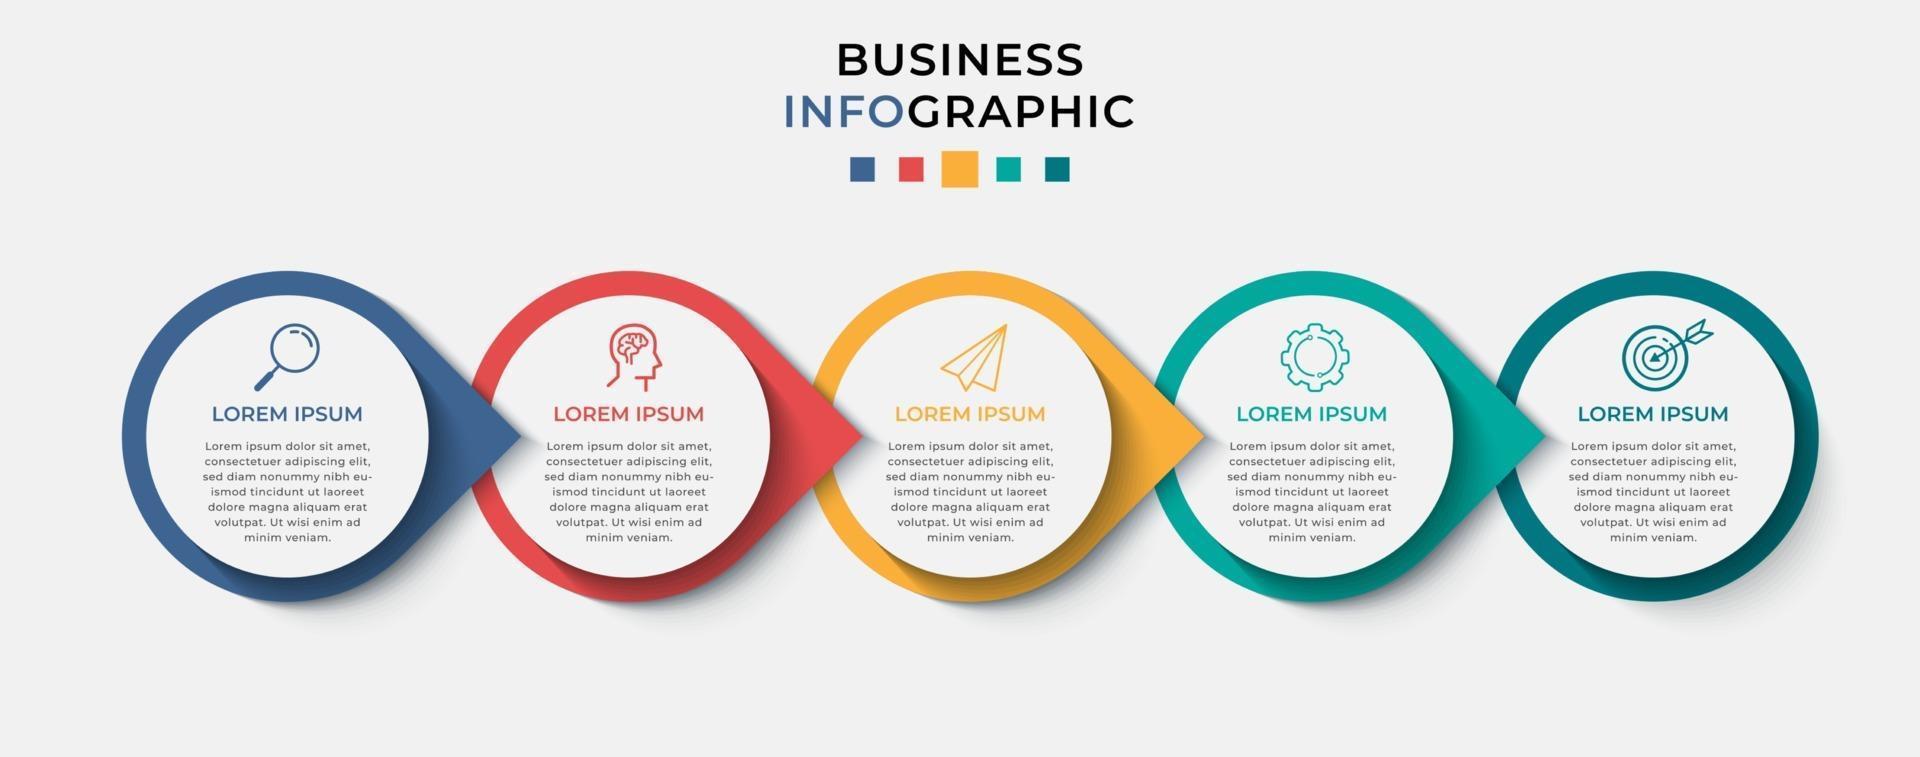 Vector Infographic design business template with icons and 5 options or steps